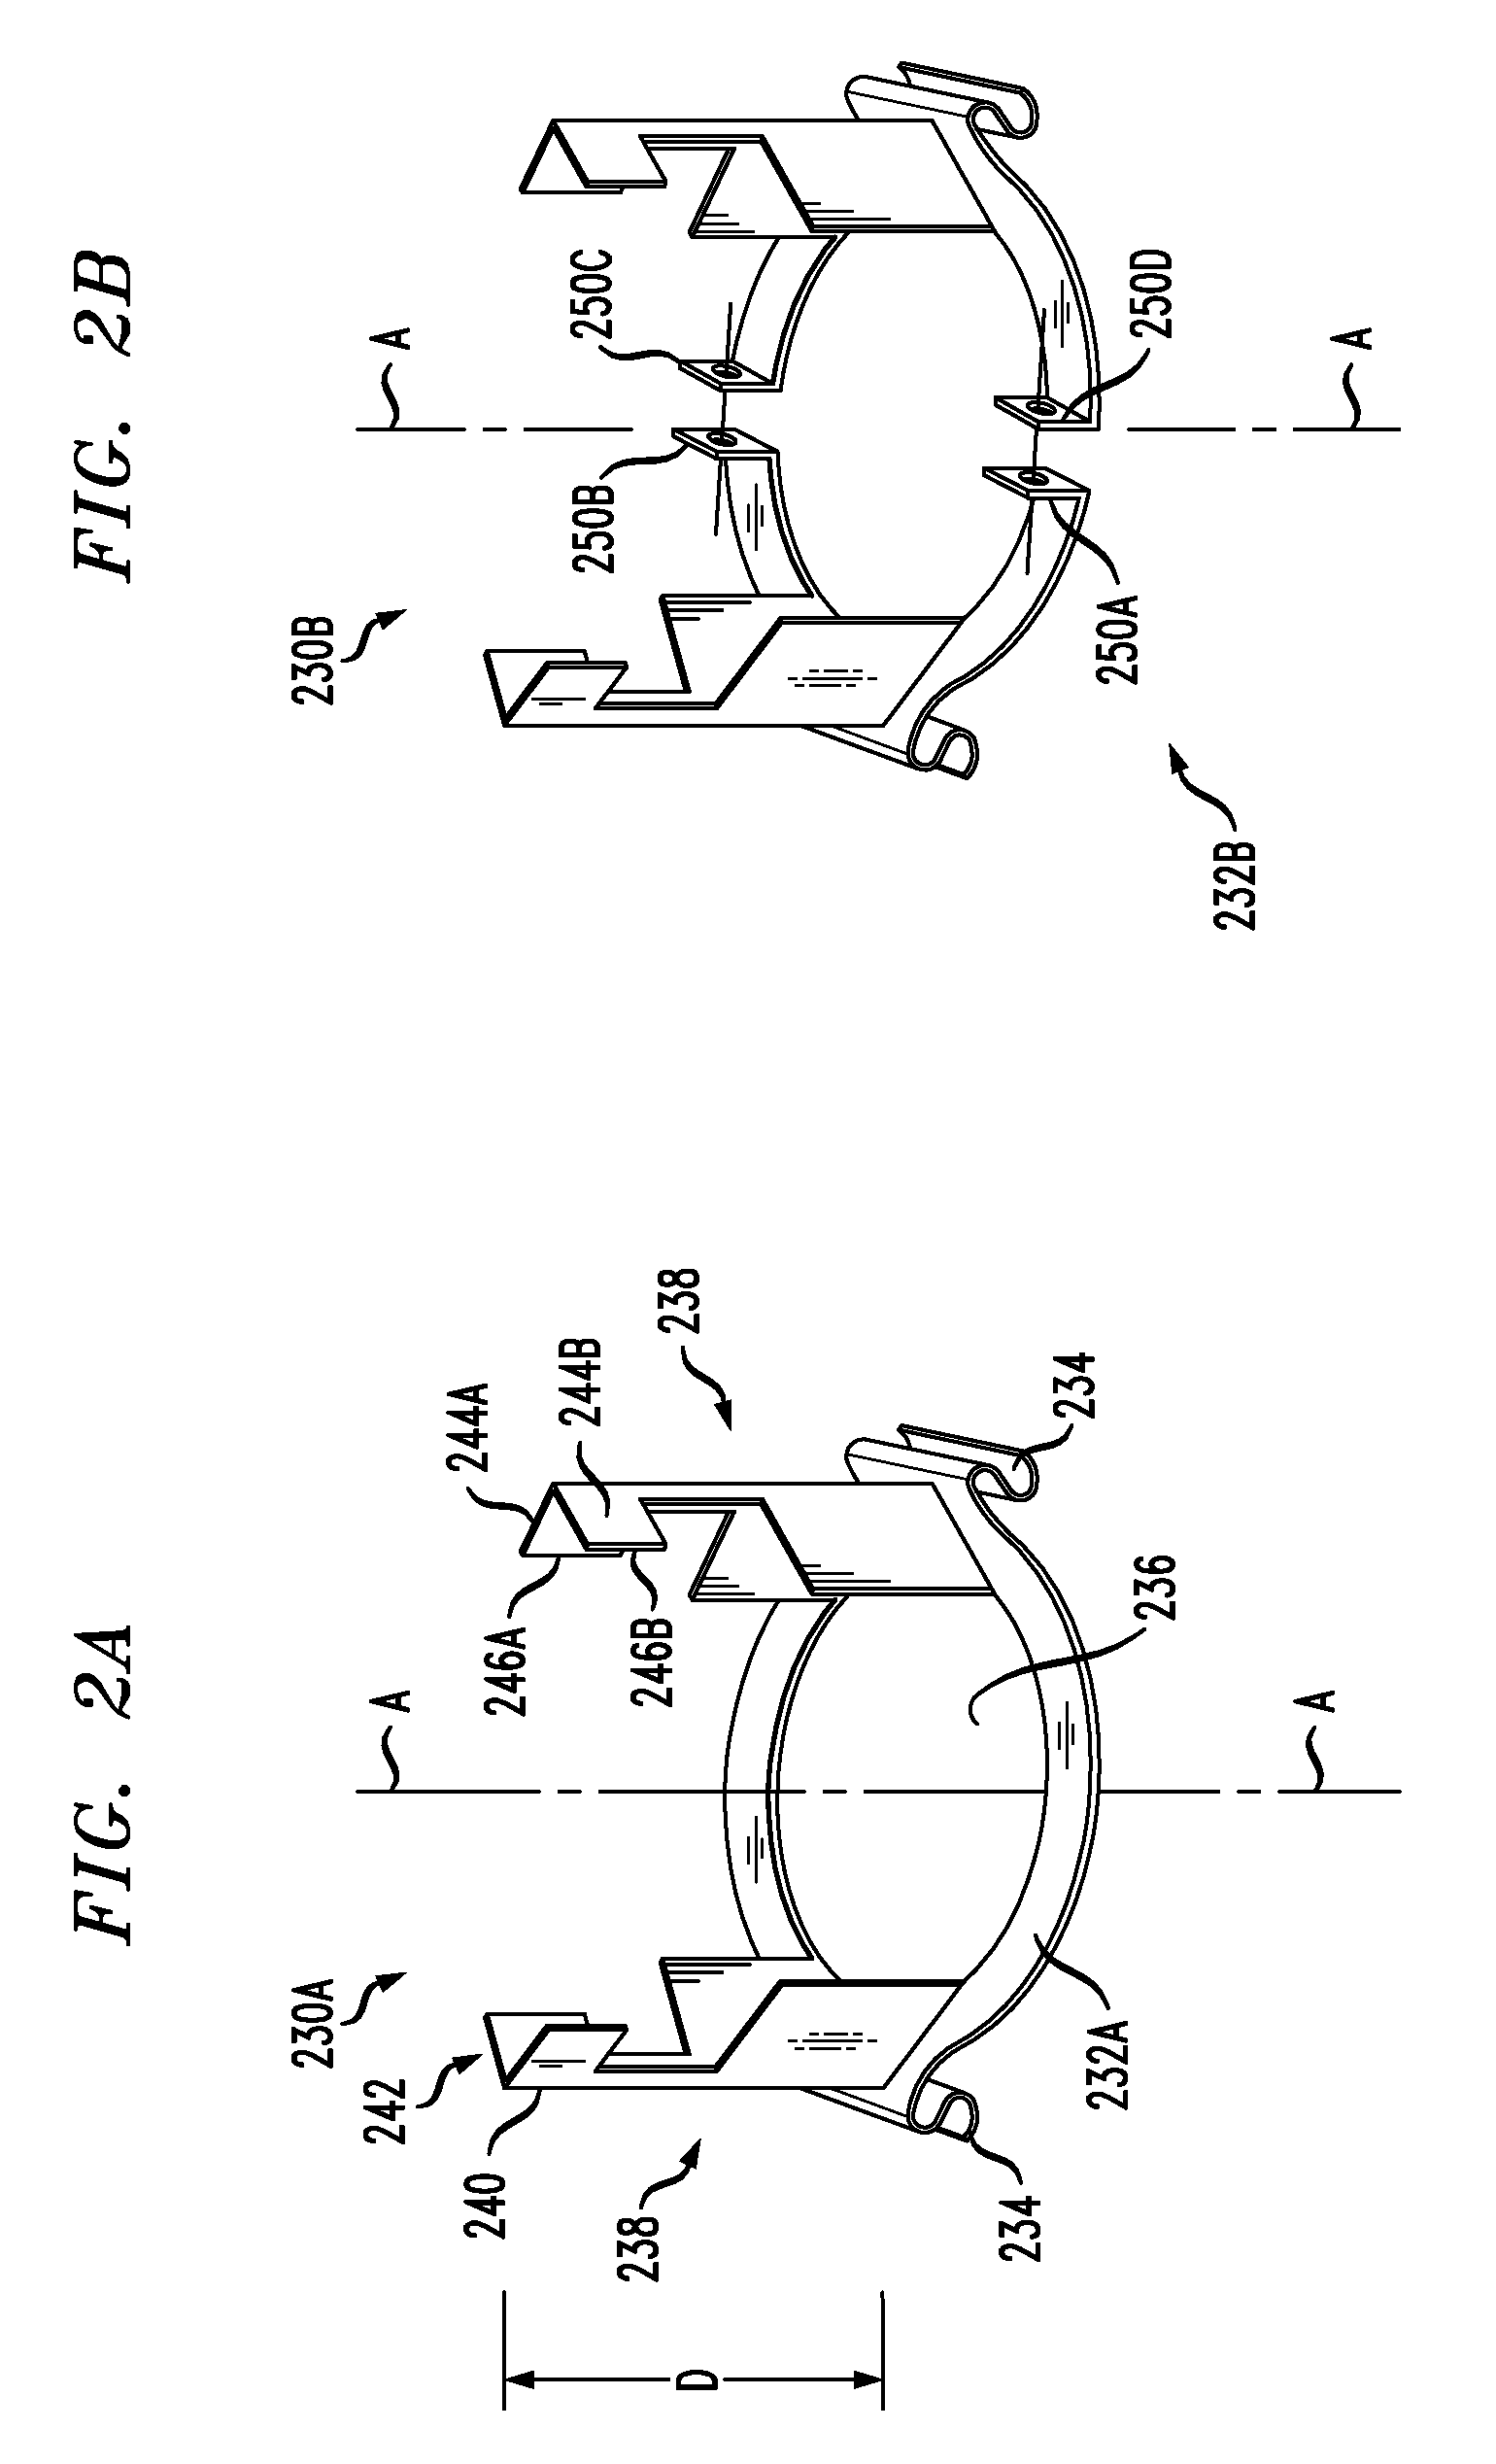 Anti-Decoupling device for a spin coupling